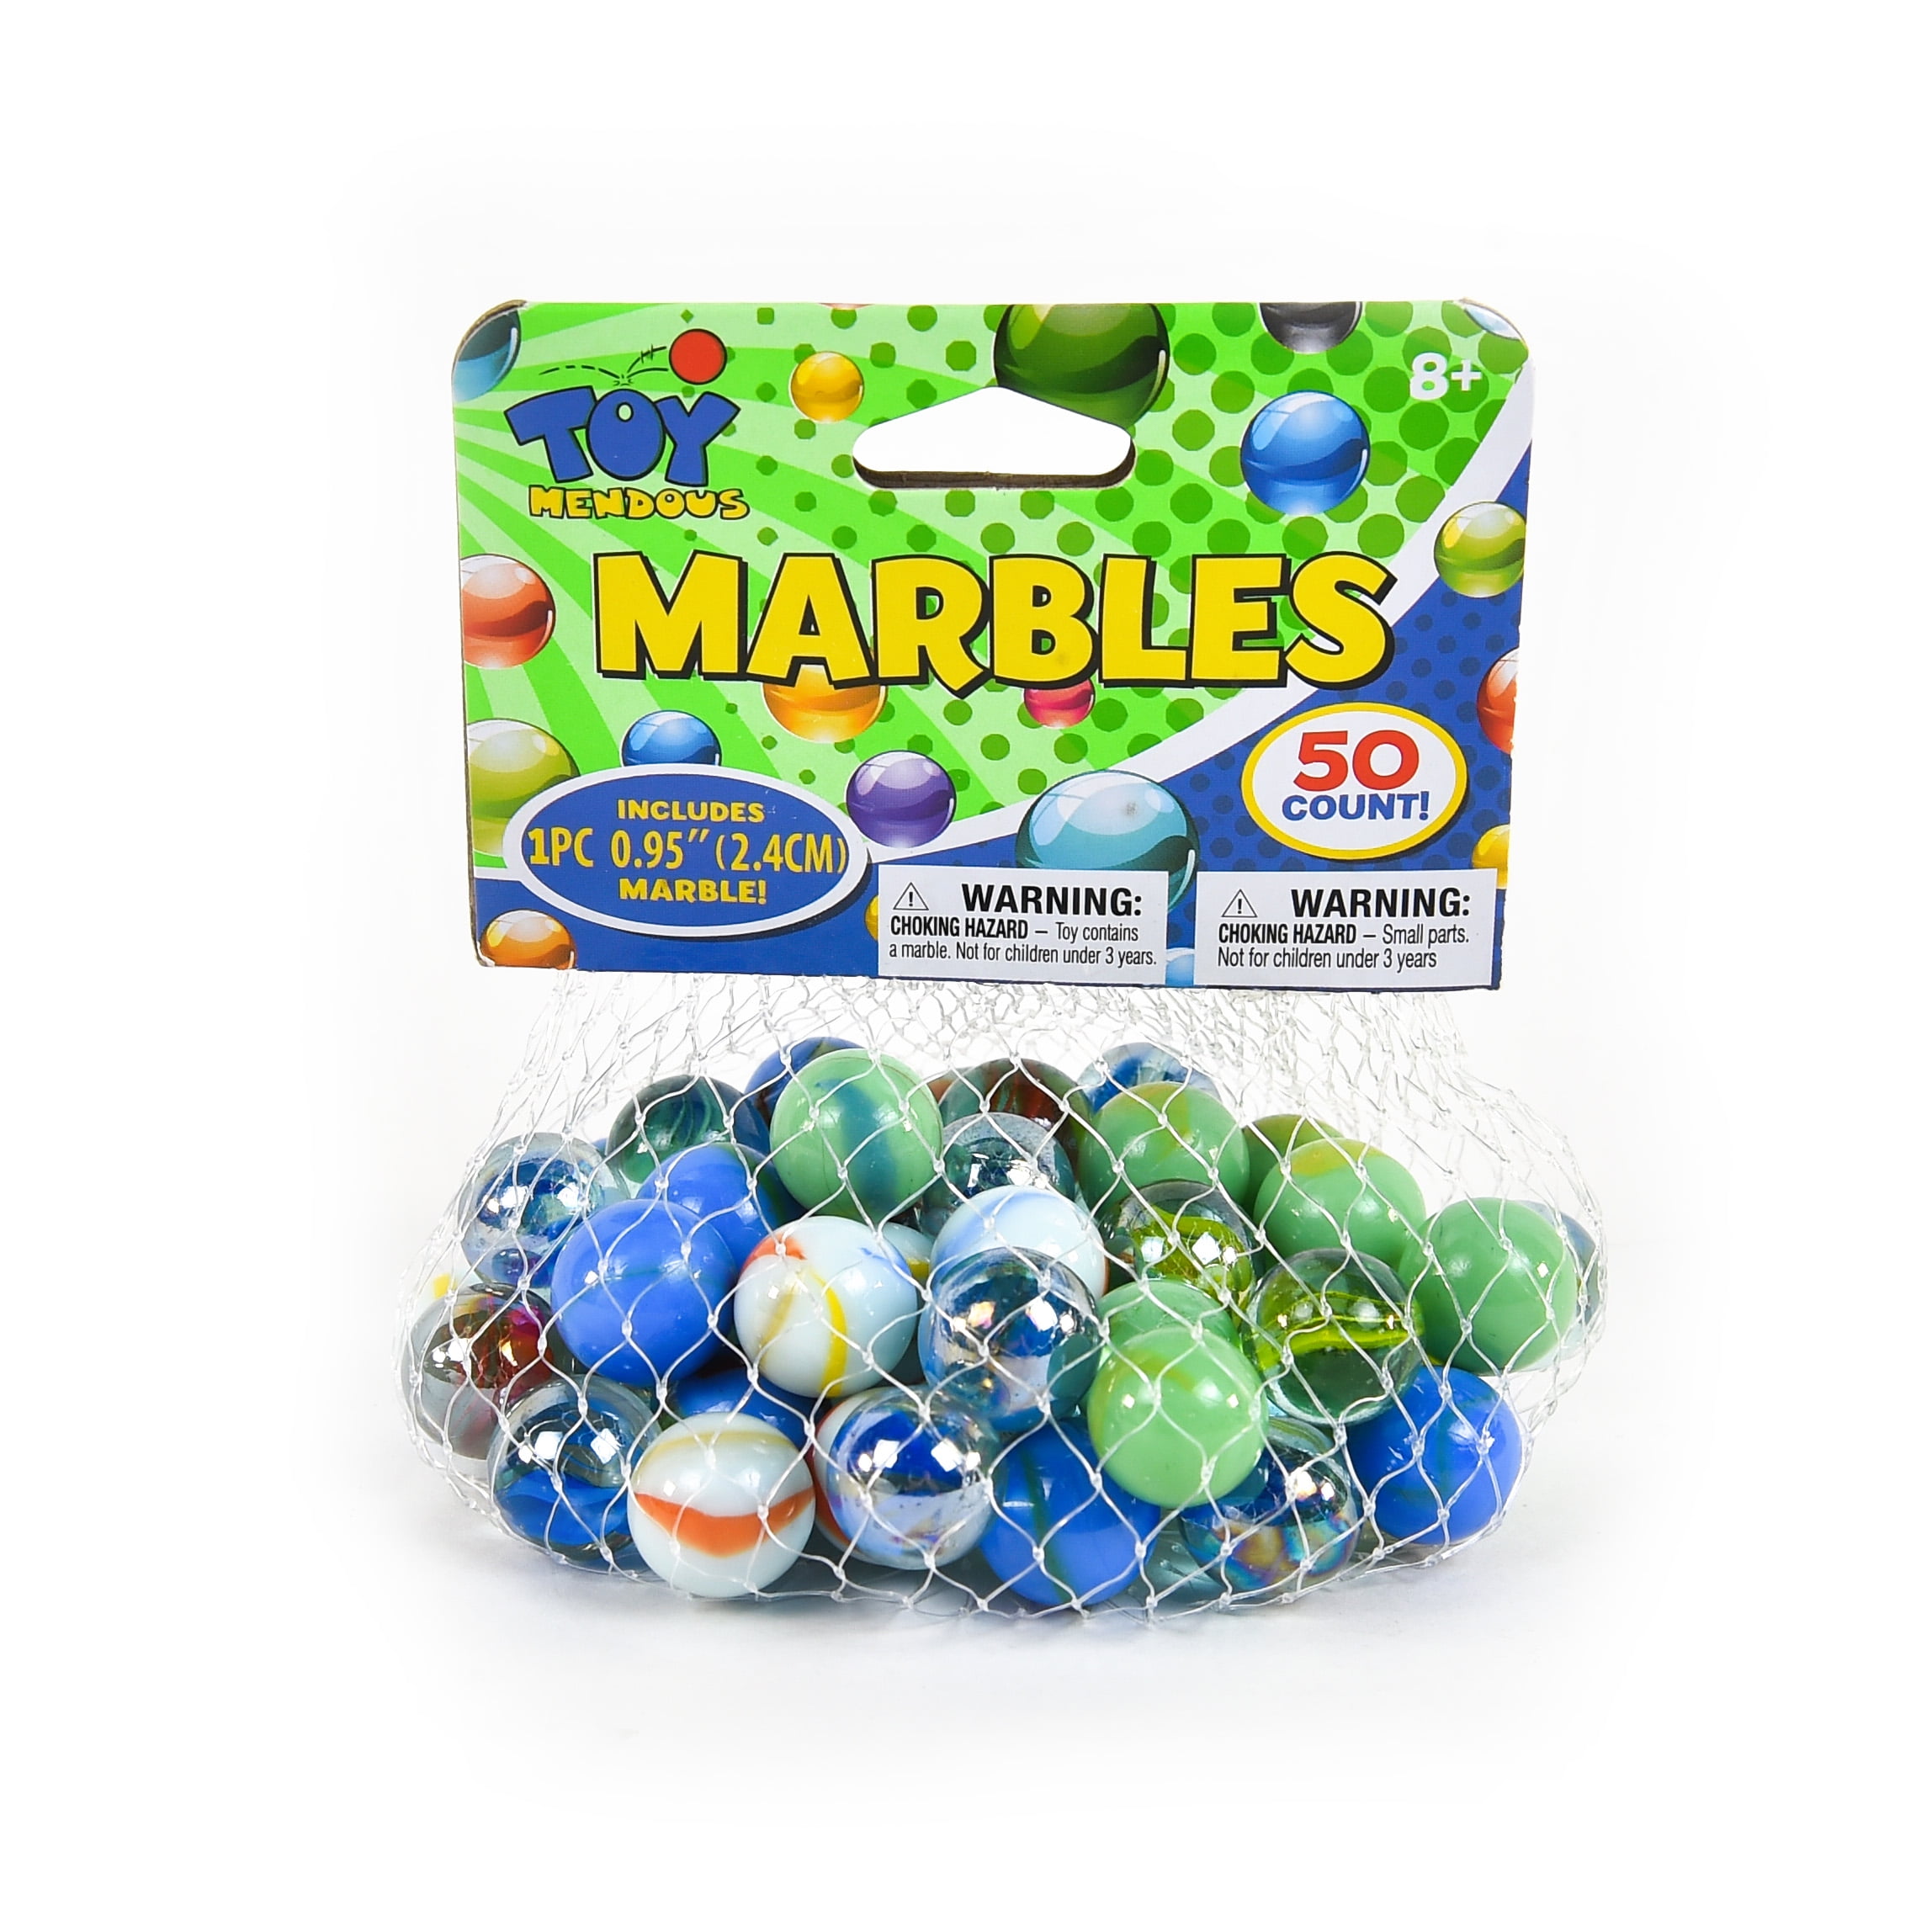 GLASS MARBLES GREEN PACK UP TO 150 CHILDREN’S TOY OR DECORATOR OR CRAFT MARBLES 